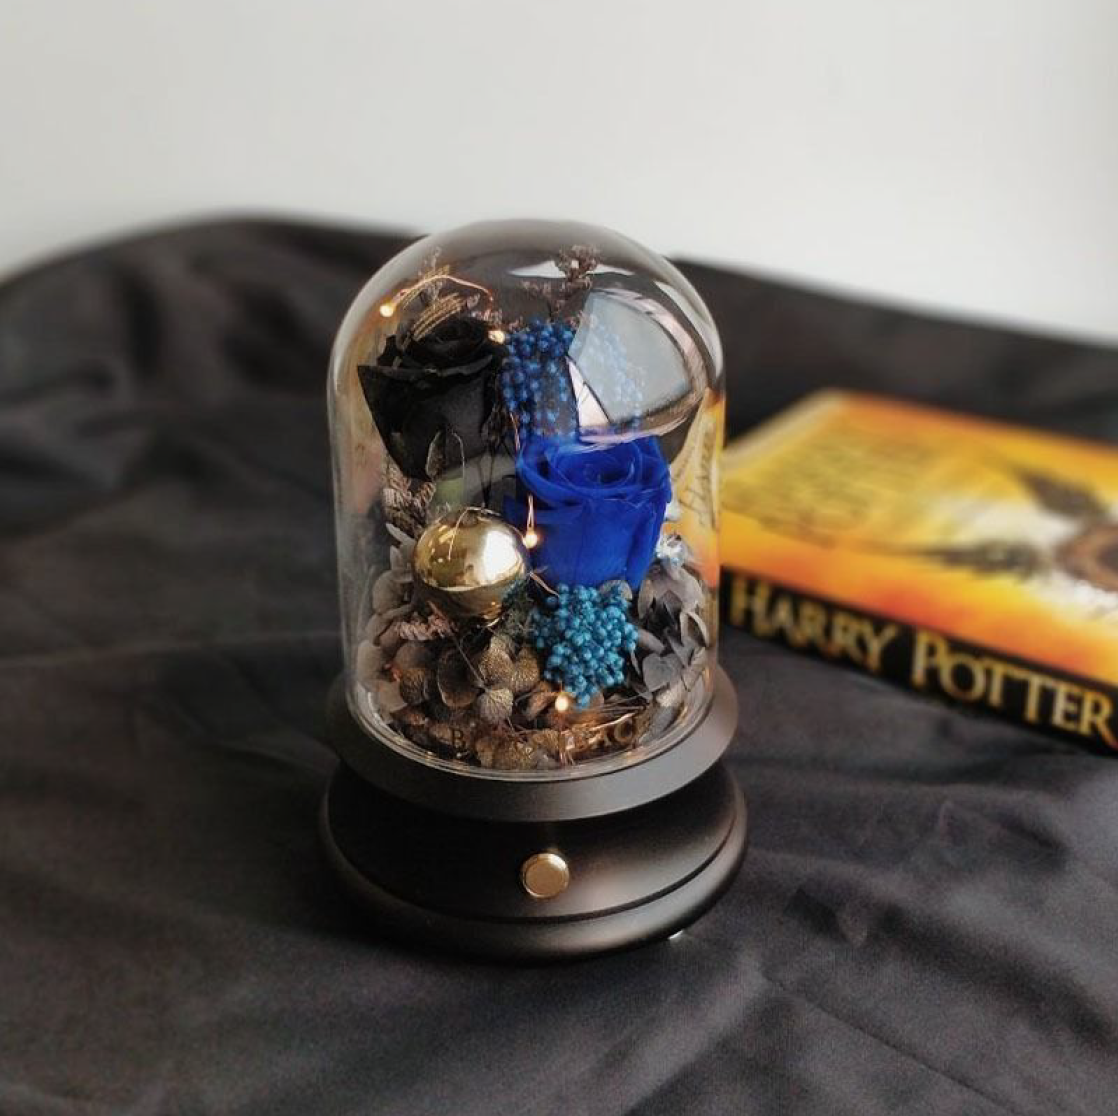 Blue and black rose in glass dome with the bluetooth speaker embedded inside and black base. Behind is harry potter book in the background.